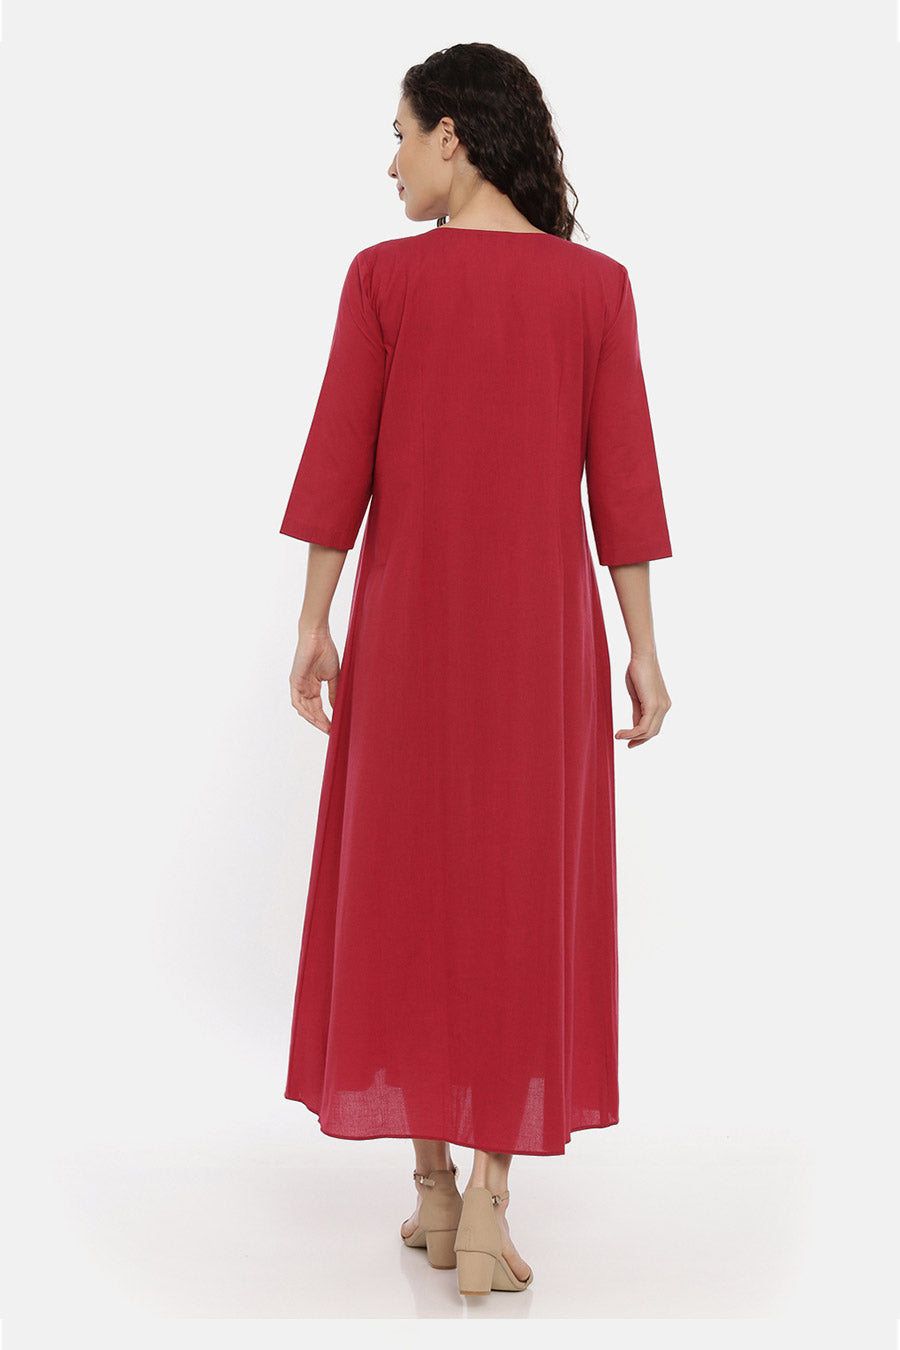 Cherry Red Cotton Pleated Dress